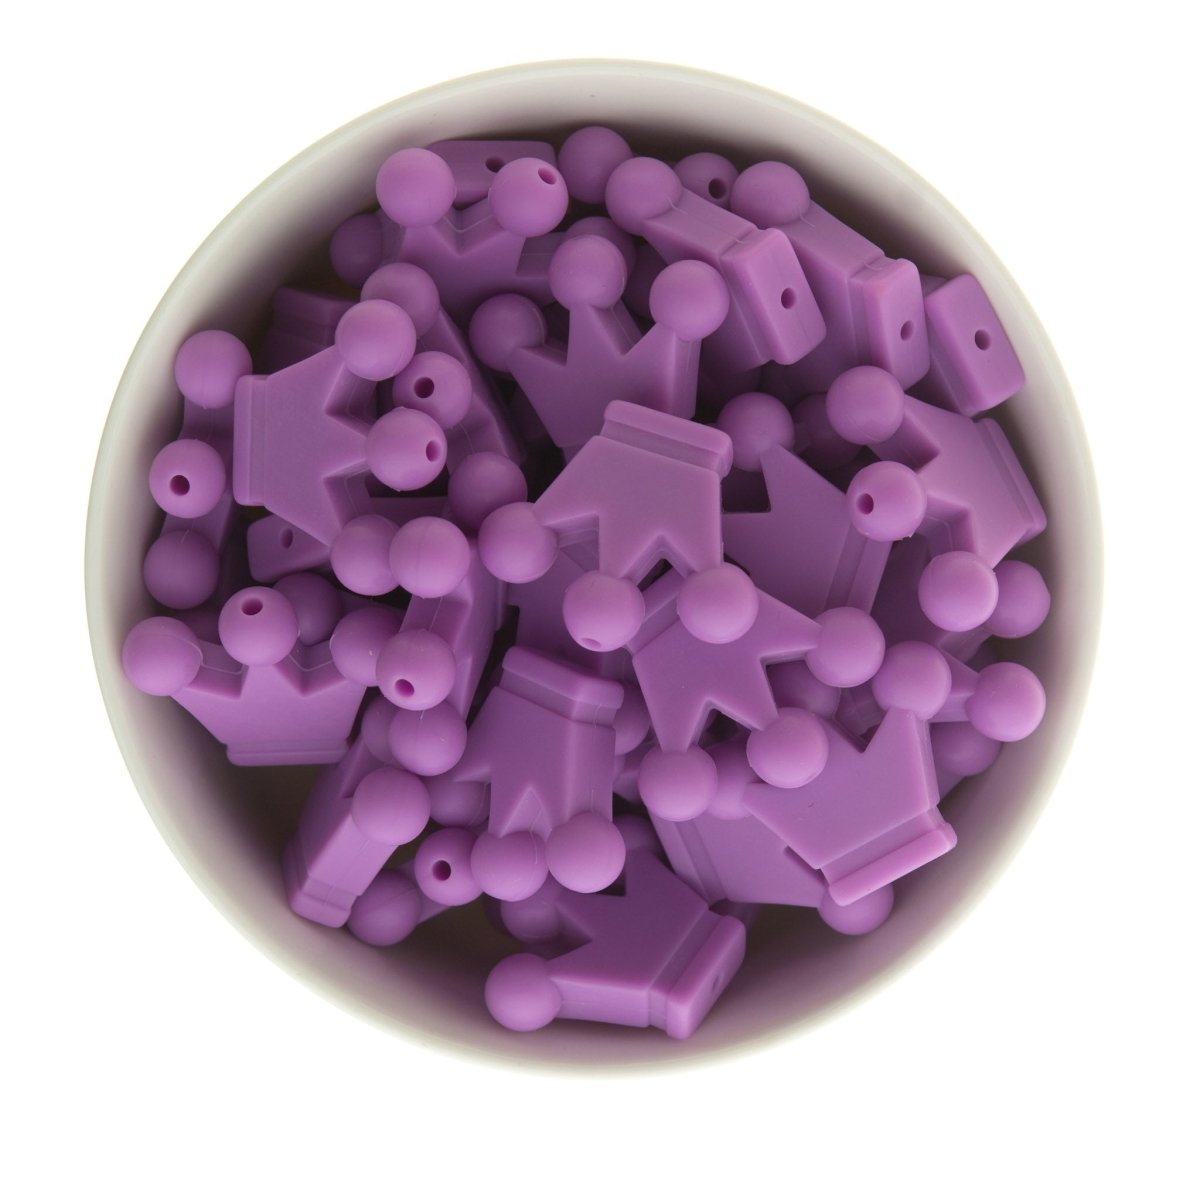 Silicone Focal Beads Crowns Lavender from Cara & Co Craft Supply